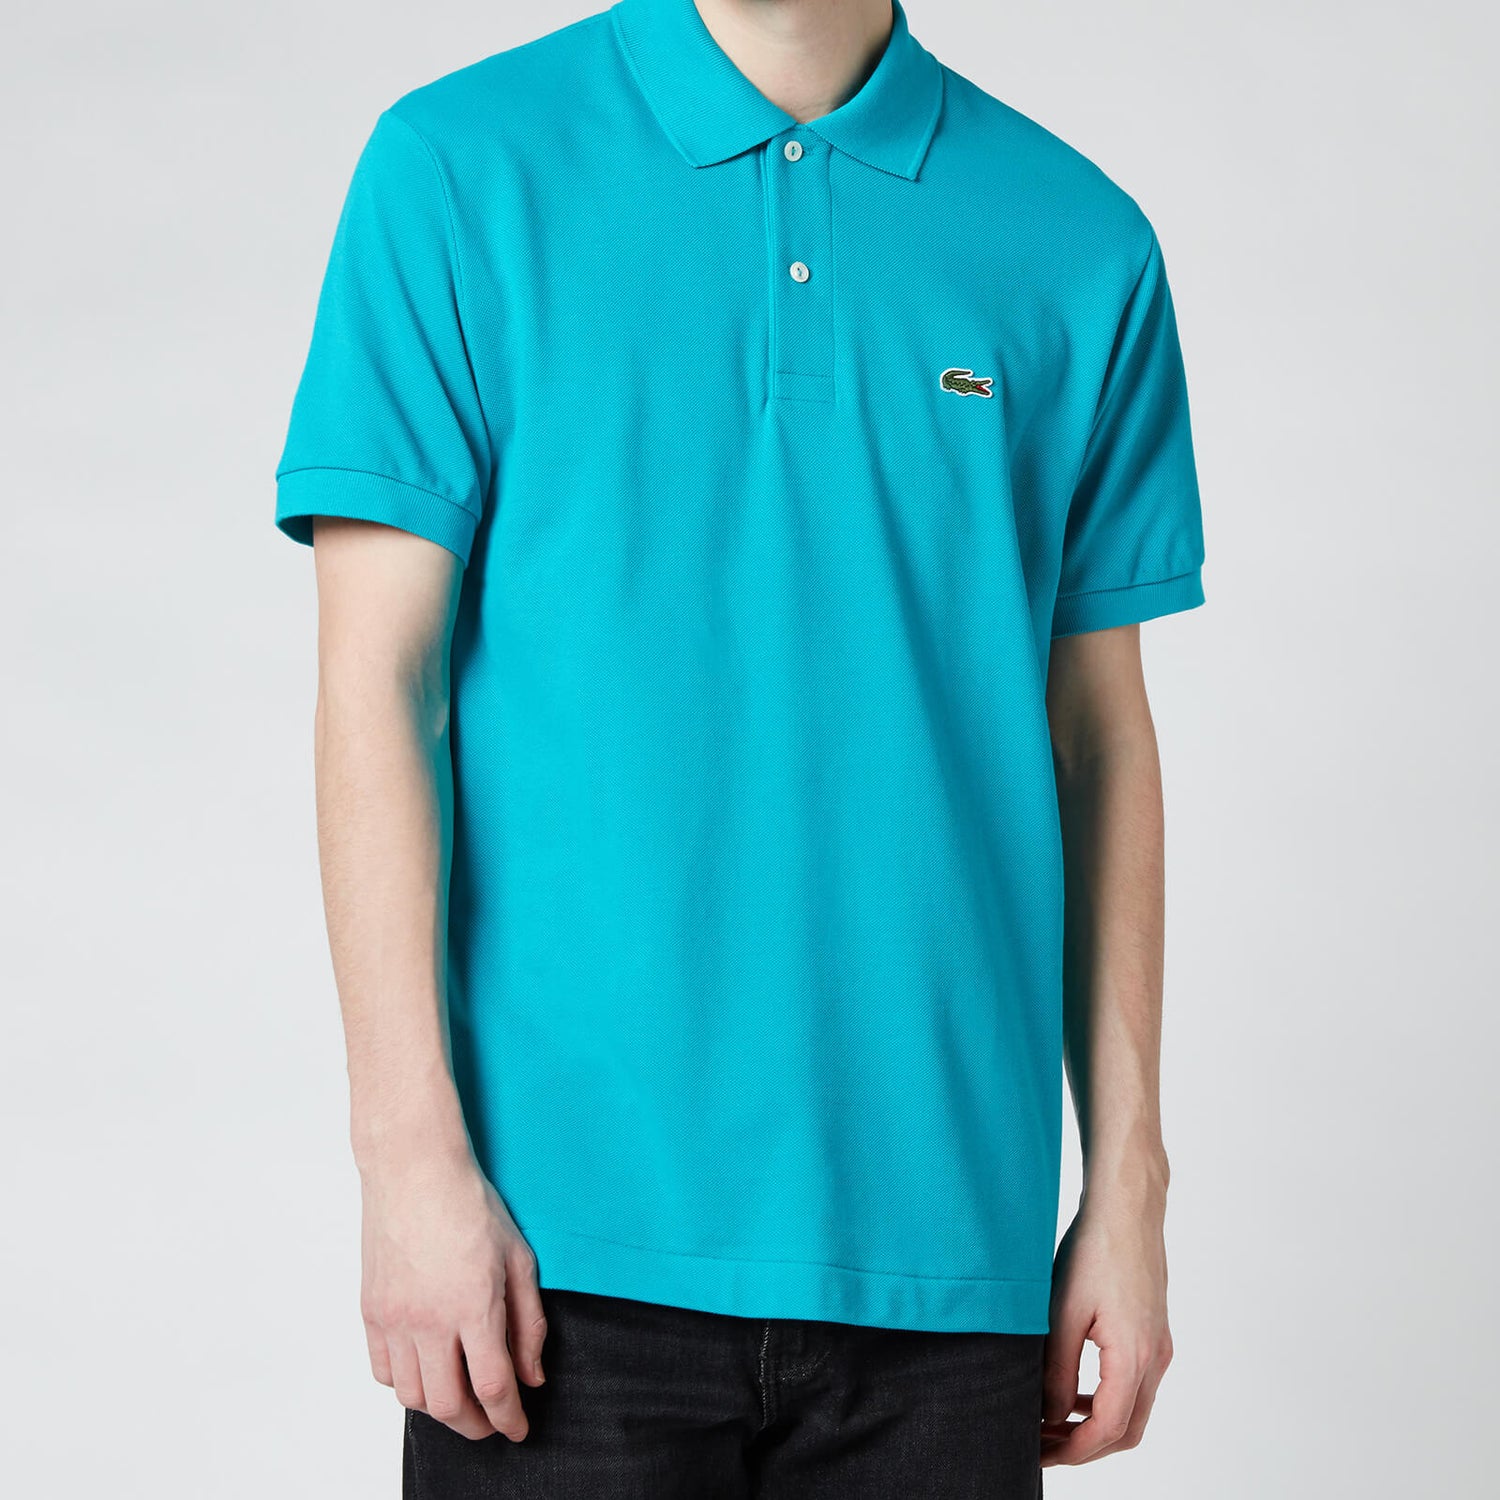 Lacoste Men's Classic Fit Polo Shirt - Reef